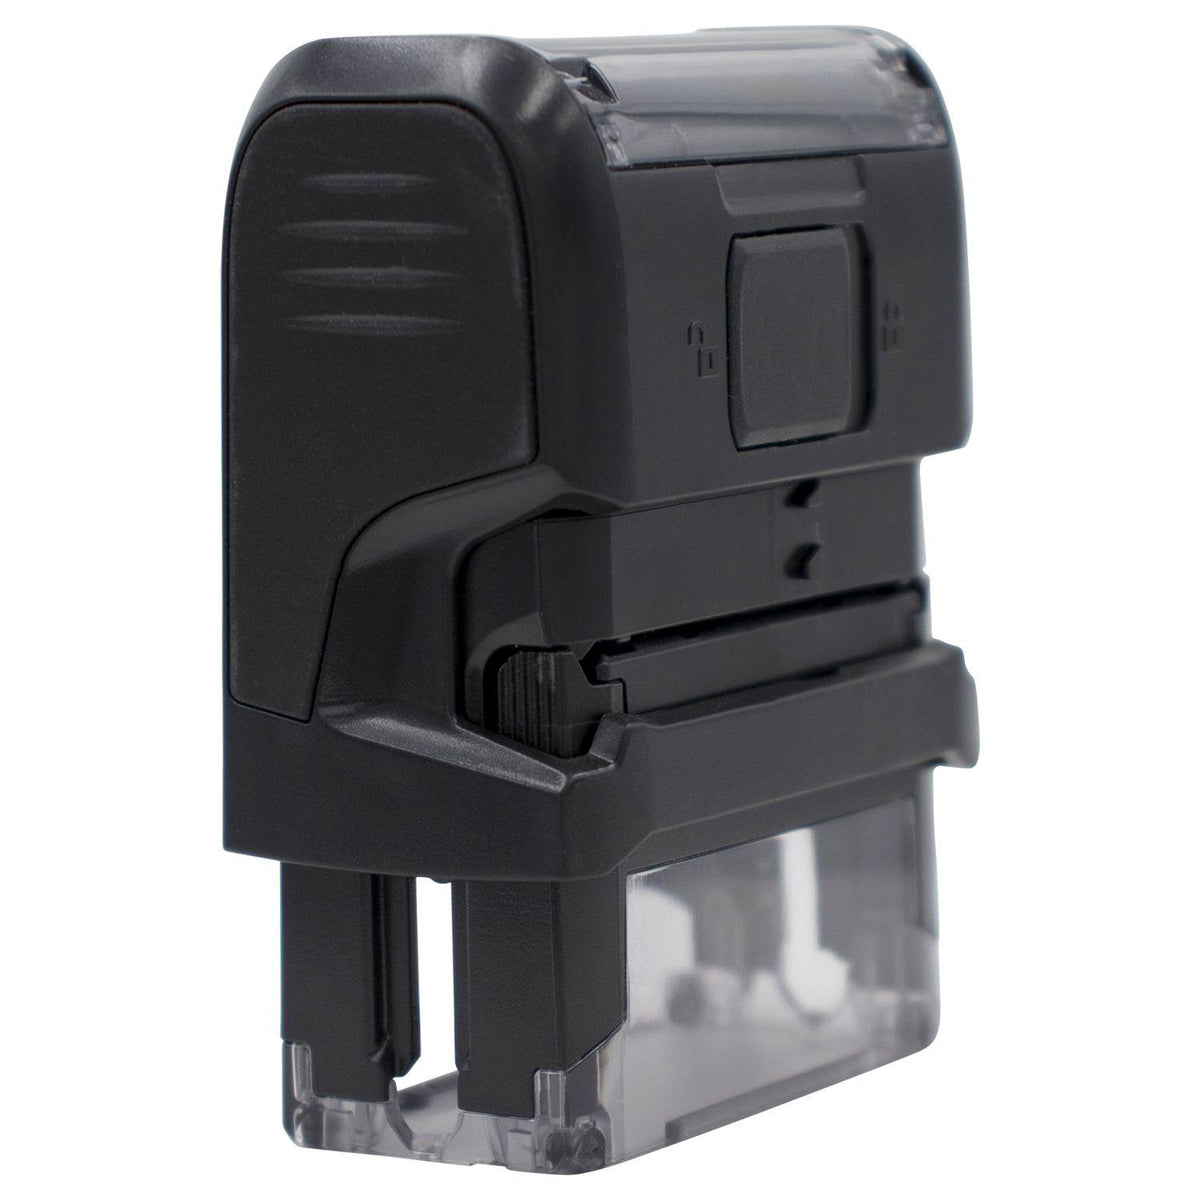 Self-Inking Bold Distributed Stamp - Engineer Seal Stamps - Brand_Trodat, Impression Size_Small, Stamp Type_Self-Inking Stamp, Type of Use_Office